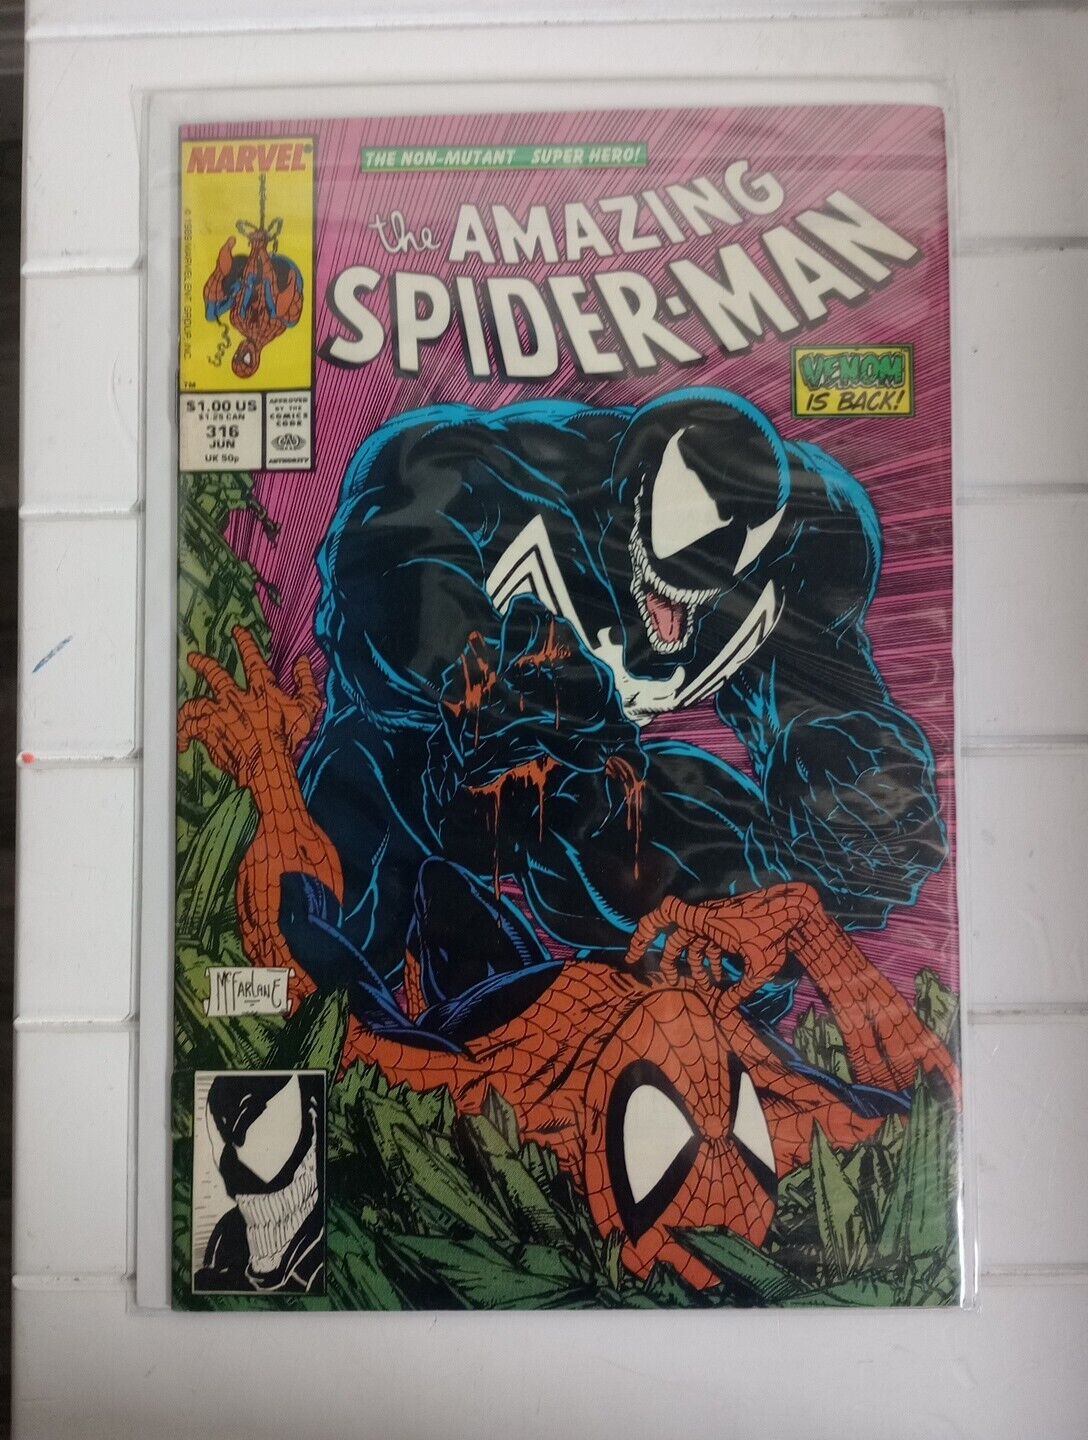 AMAZING SPIDER-MAN #316 (Marvel, 1989) 1st cover appearance of Venom